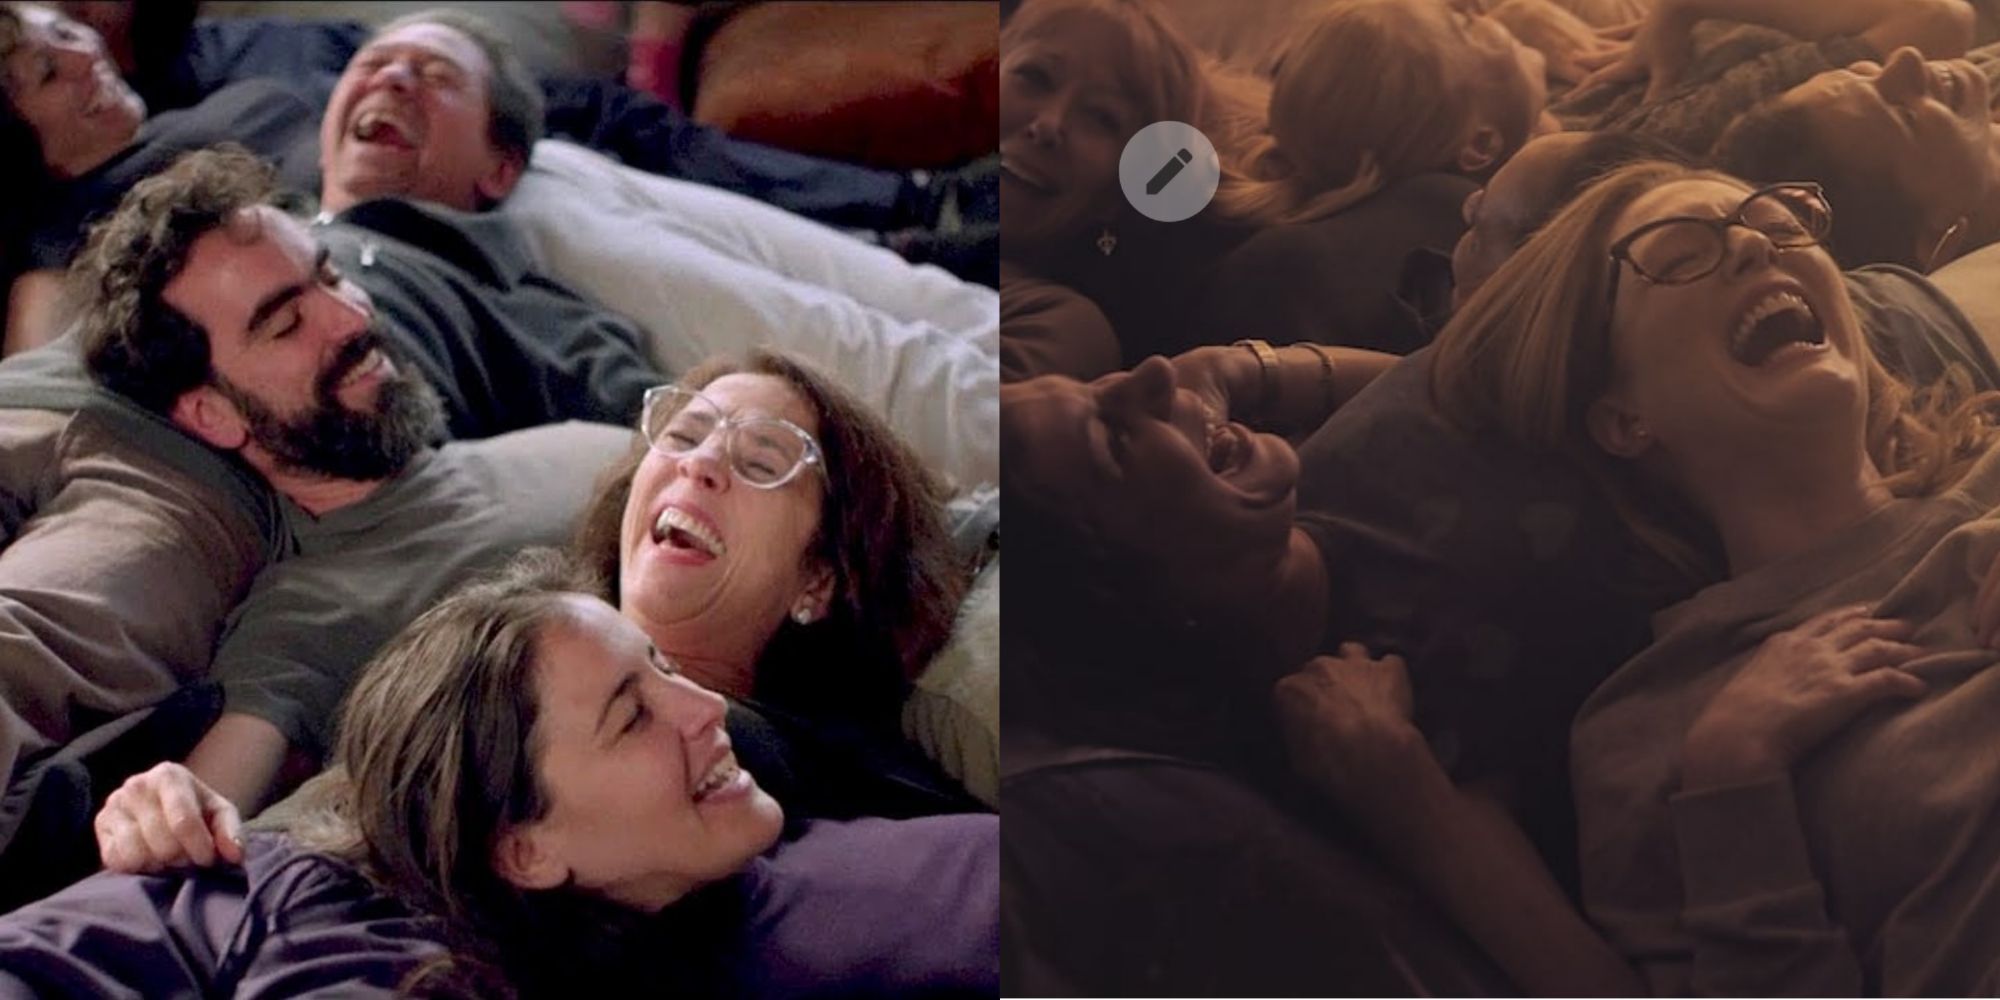 Two pictures of people lying together, laughing